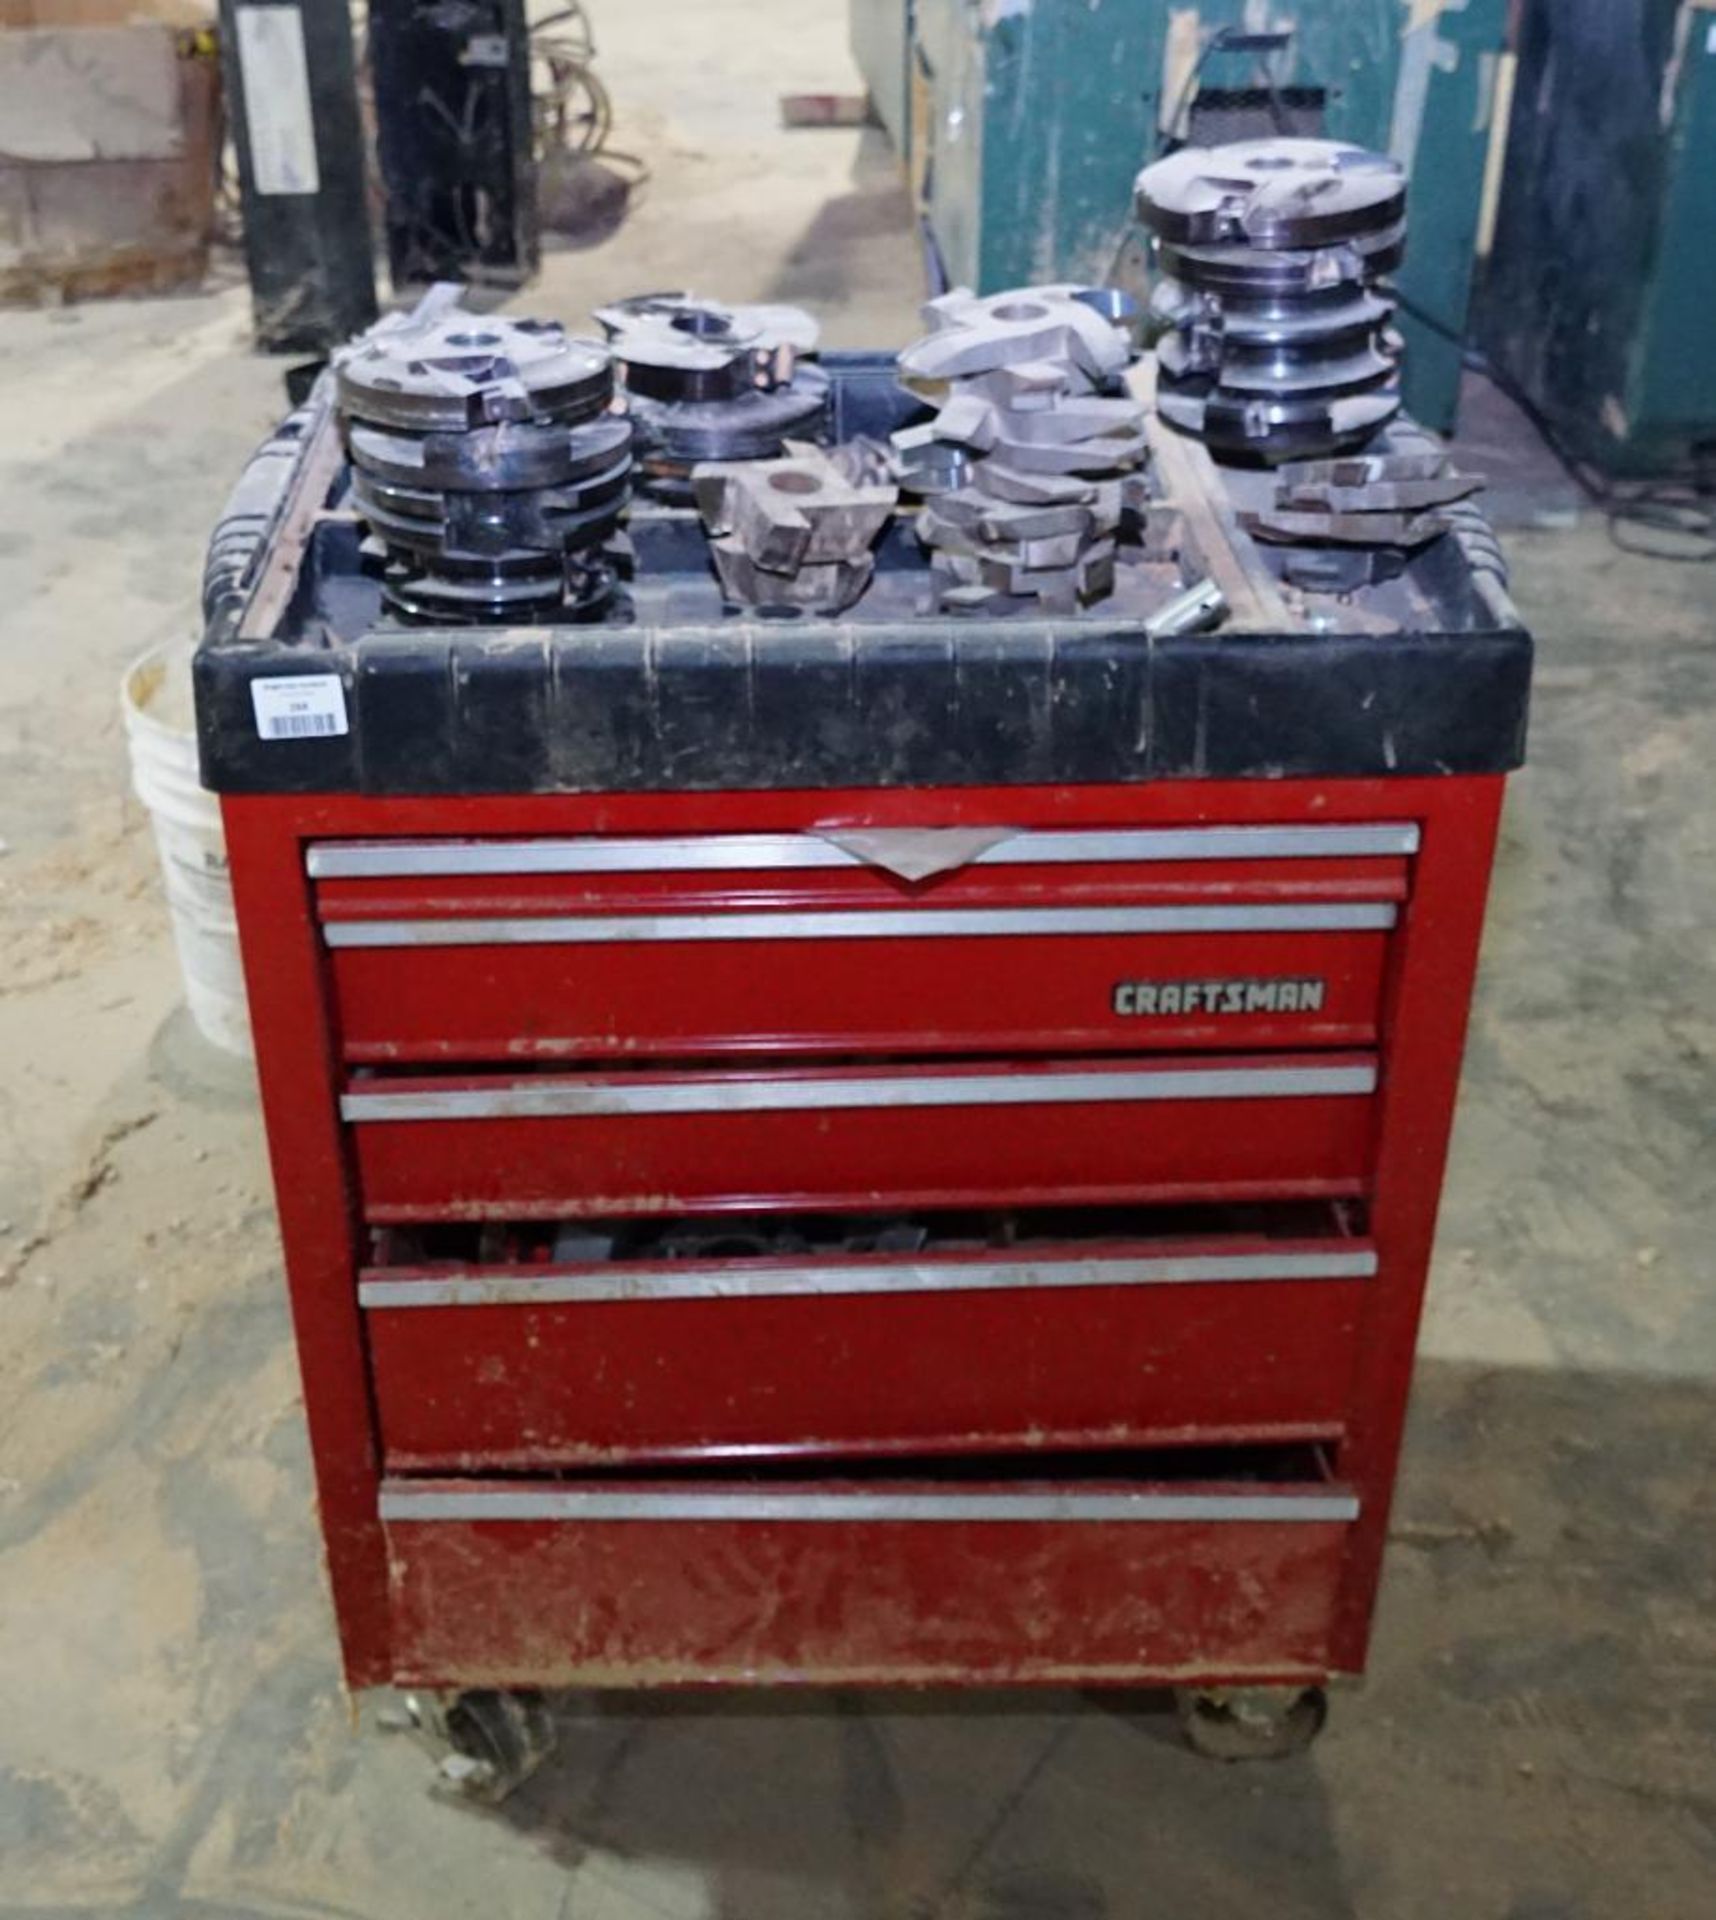 Craftsman Toolbox with Lots of Shaper Heads